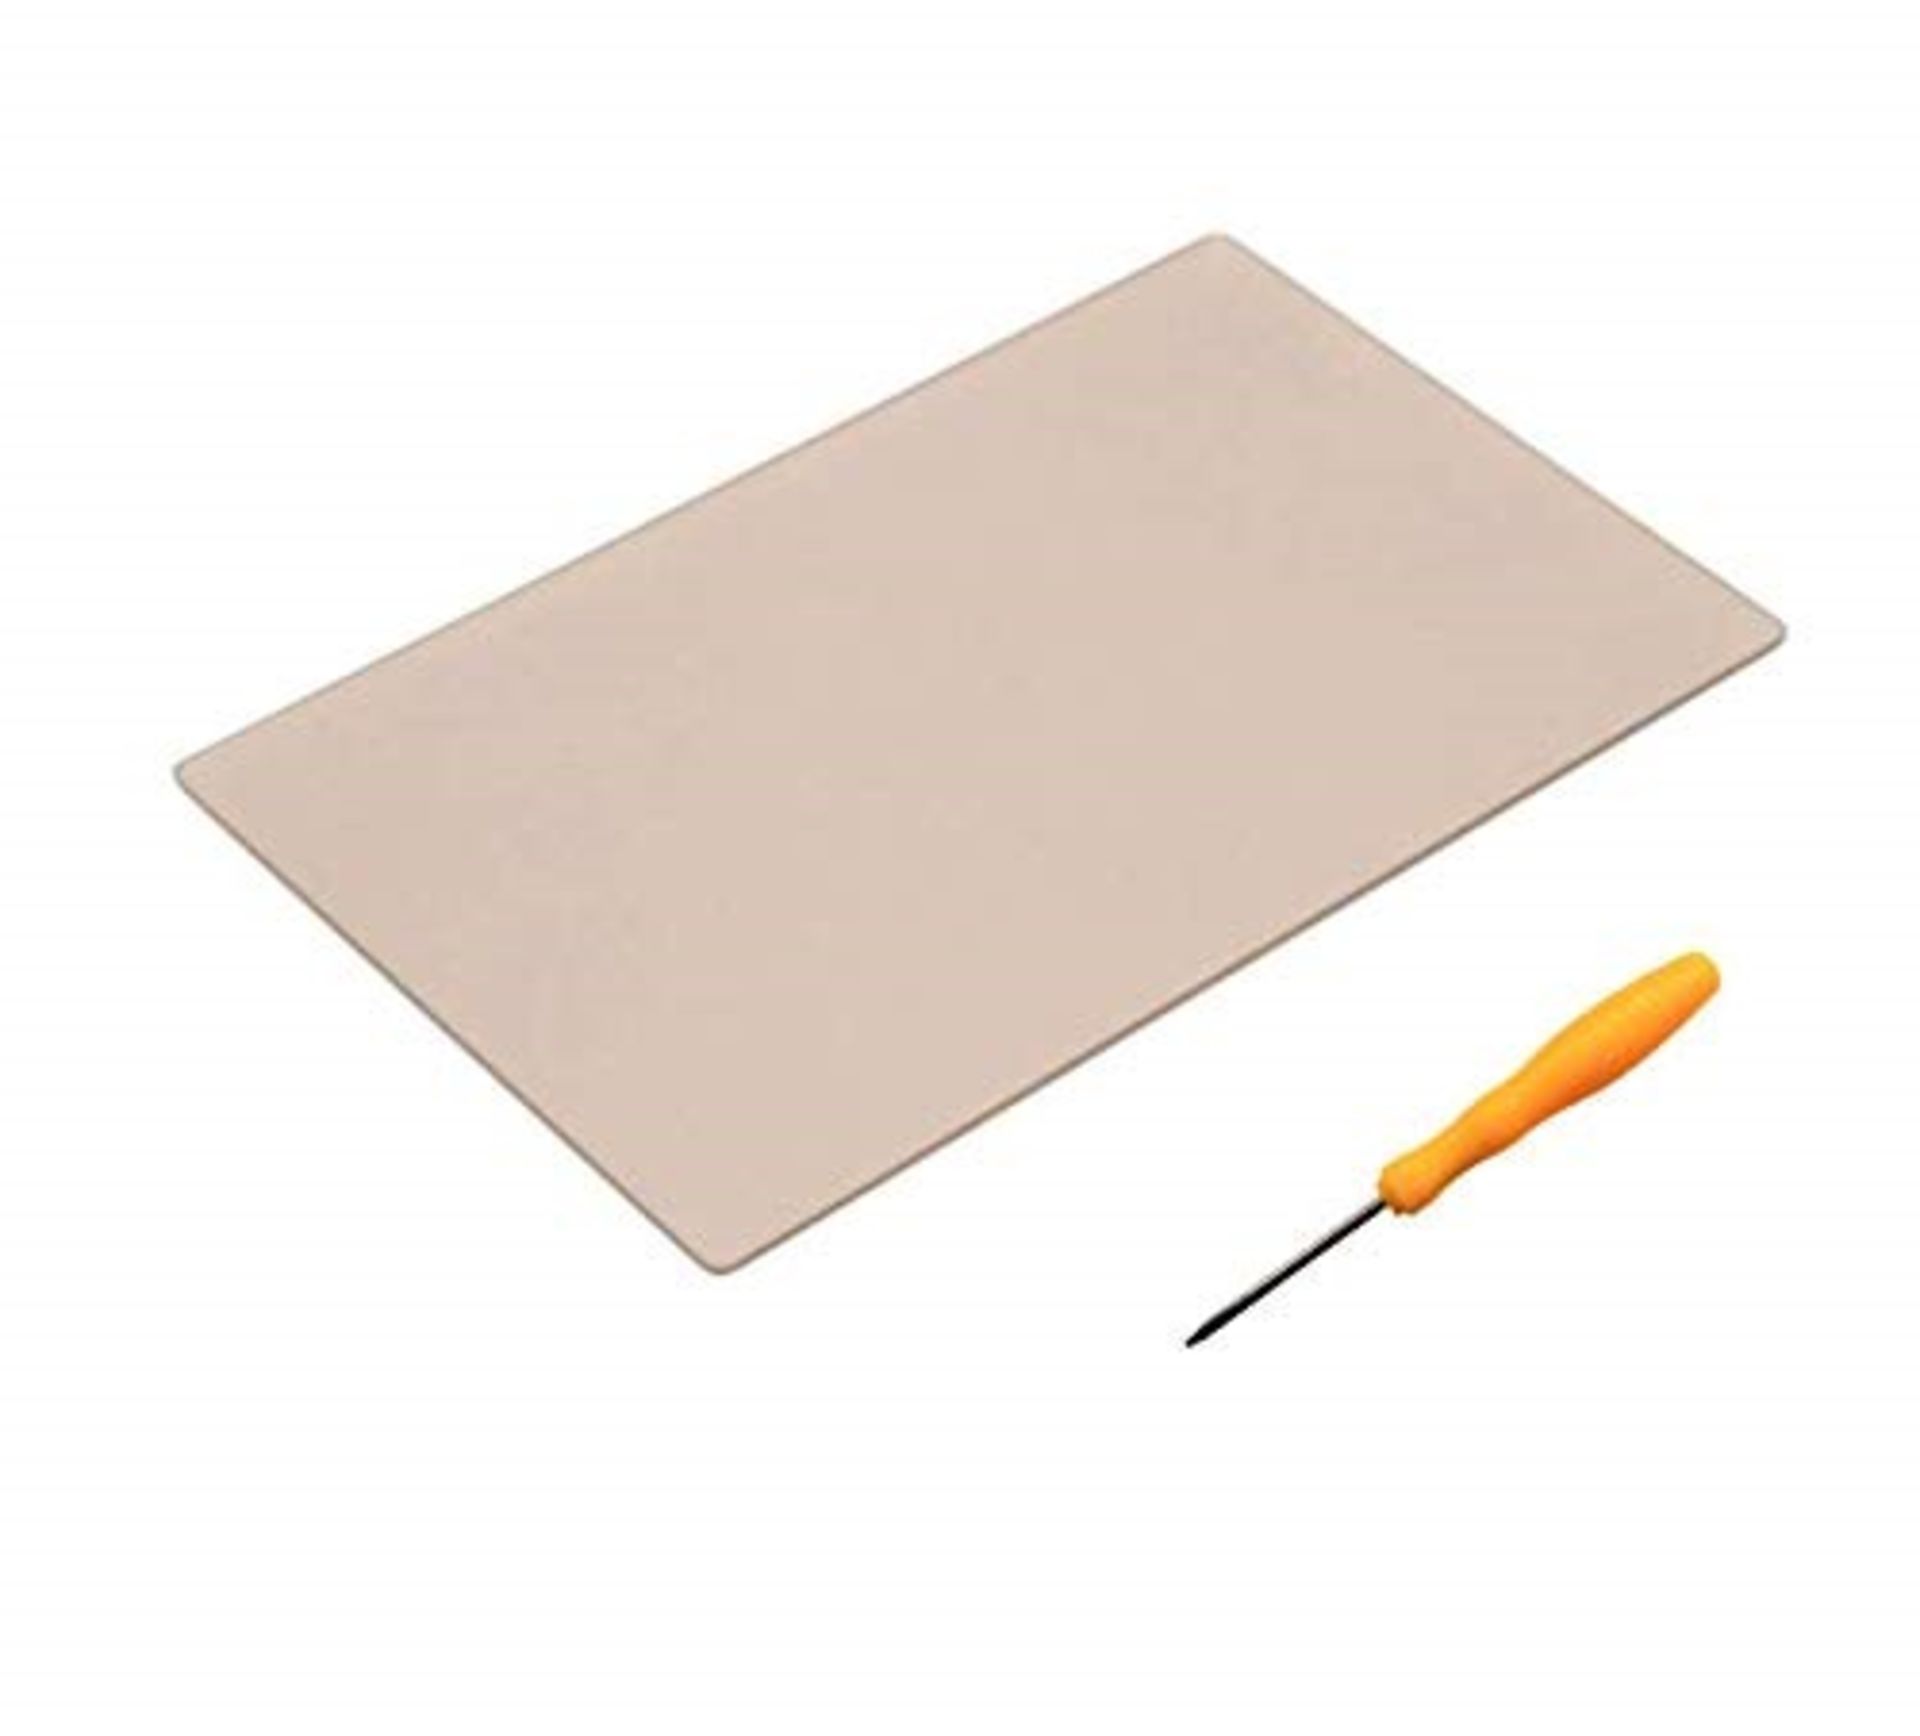 THE TECH DOCTOR Replacement Trackpad Touchpad 821-00110 for Apple MacBook A1534 12" 20